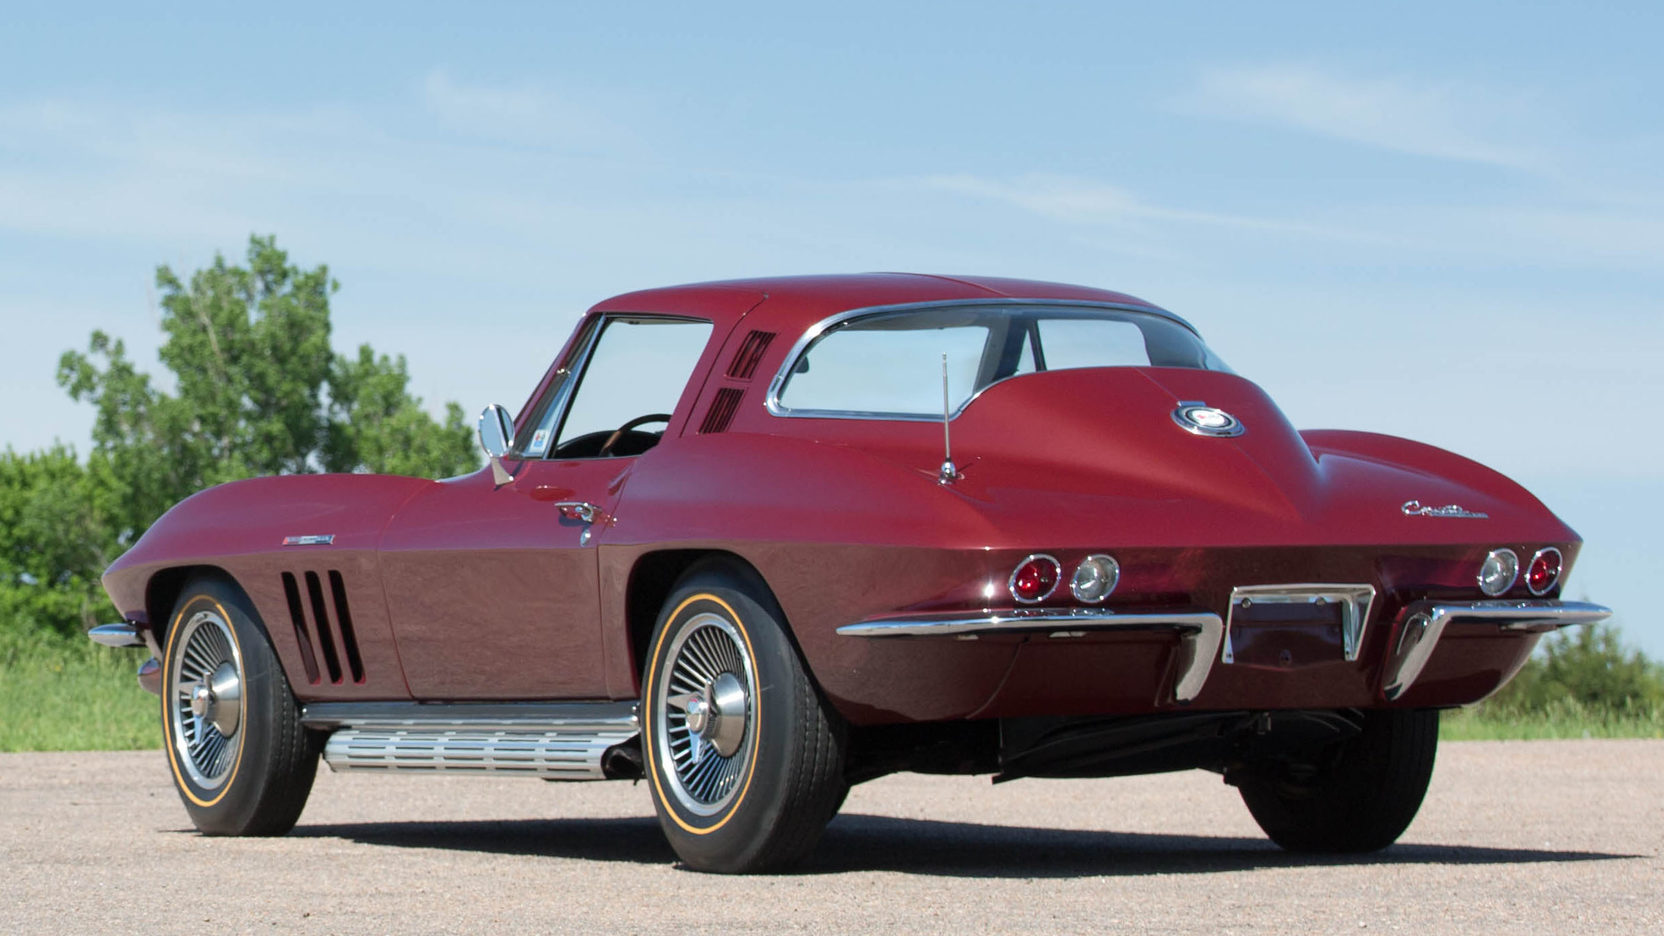 The styling of the C2 Corvette was flowing and purposeful, and very American. The taping lines of the car giving it the appearance that would make it the iconic American sports car.